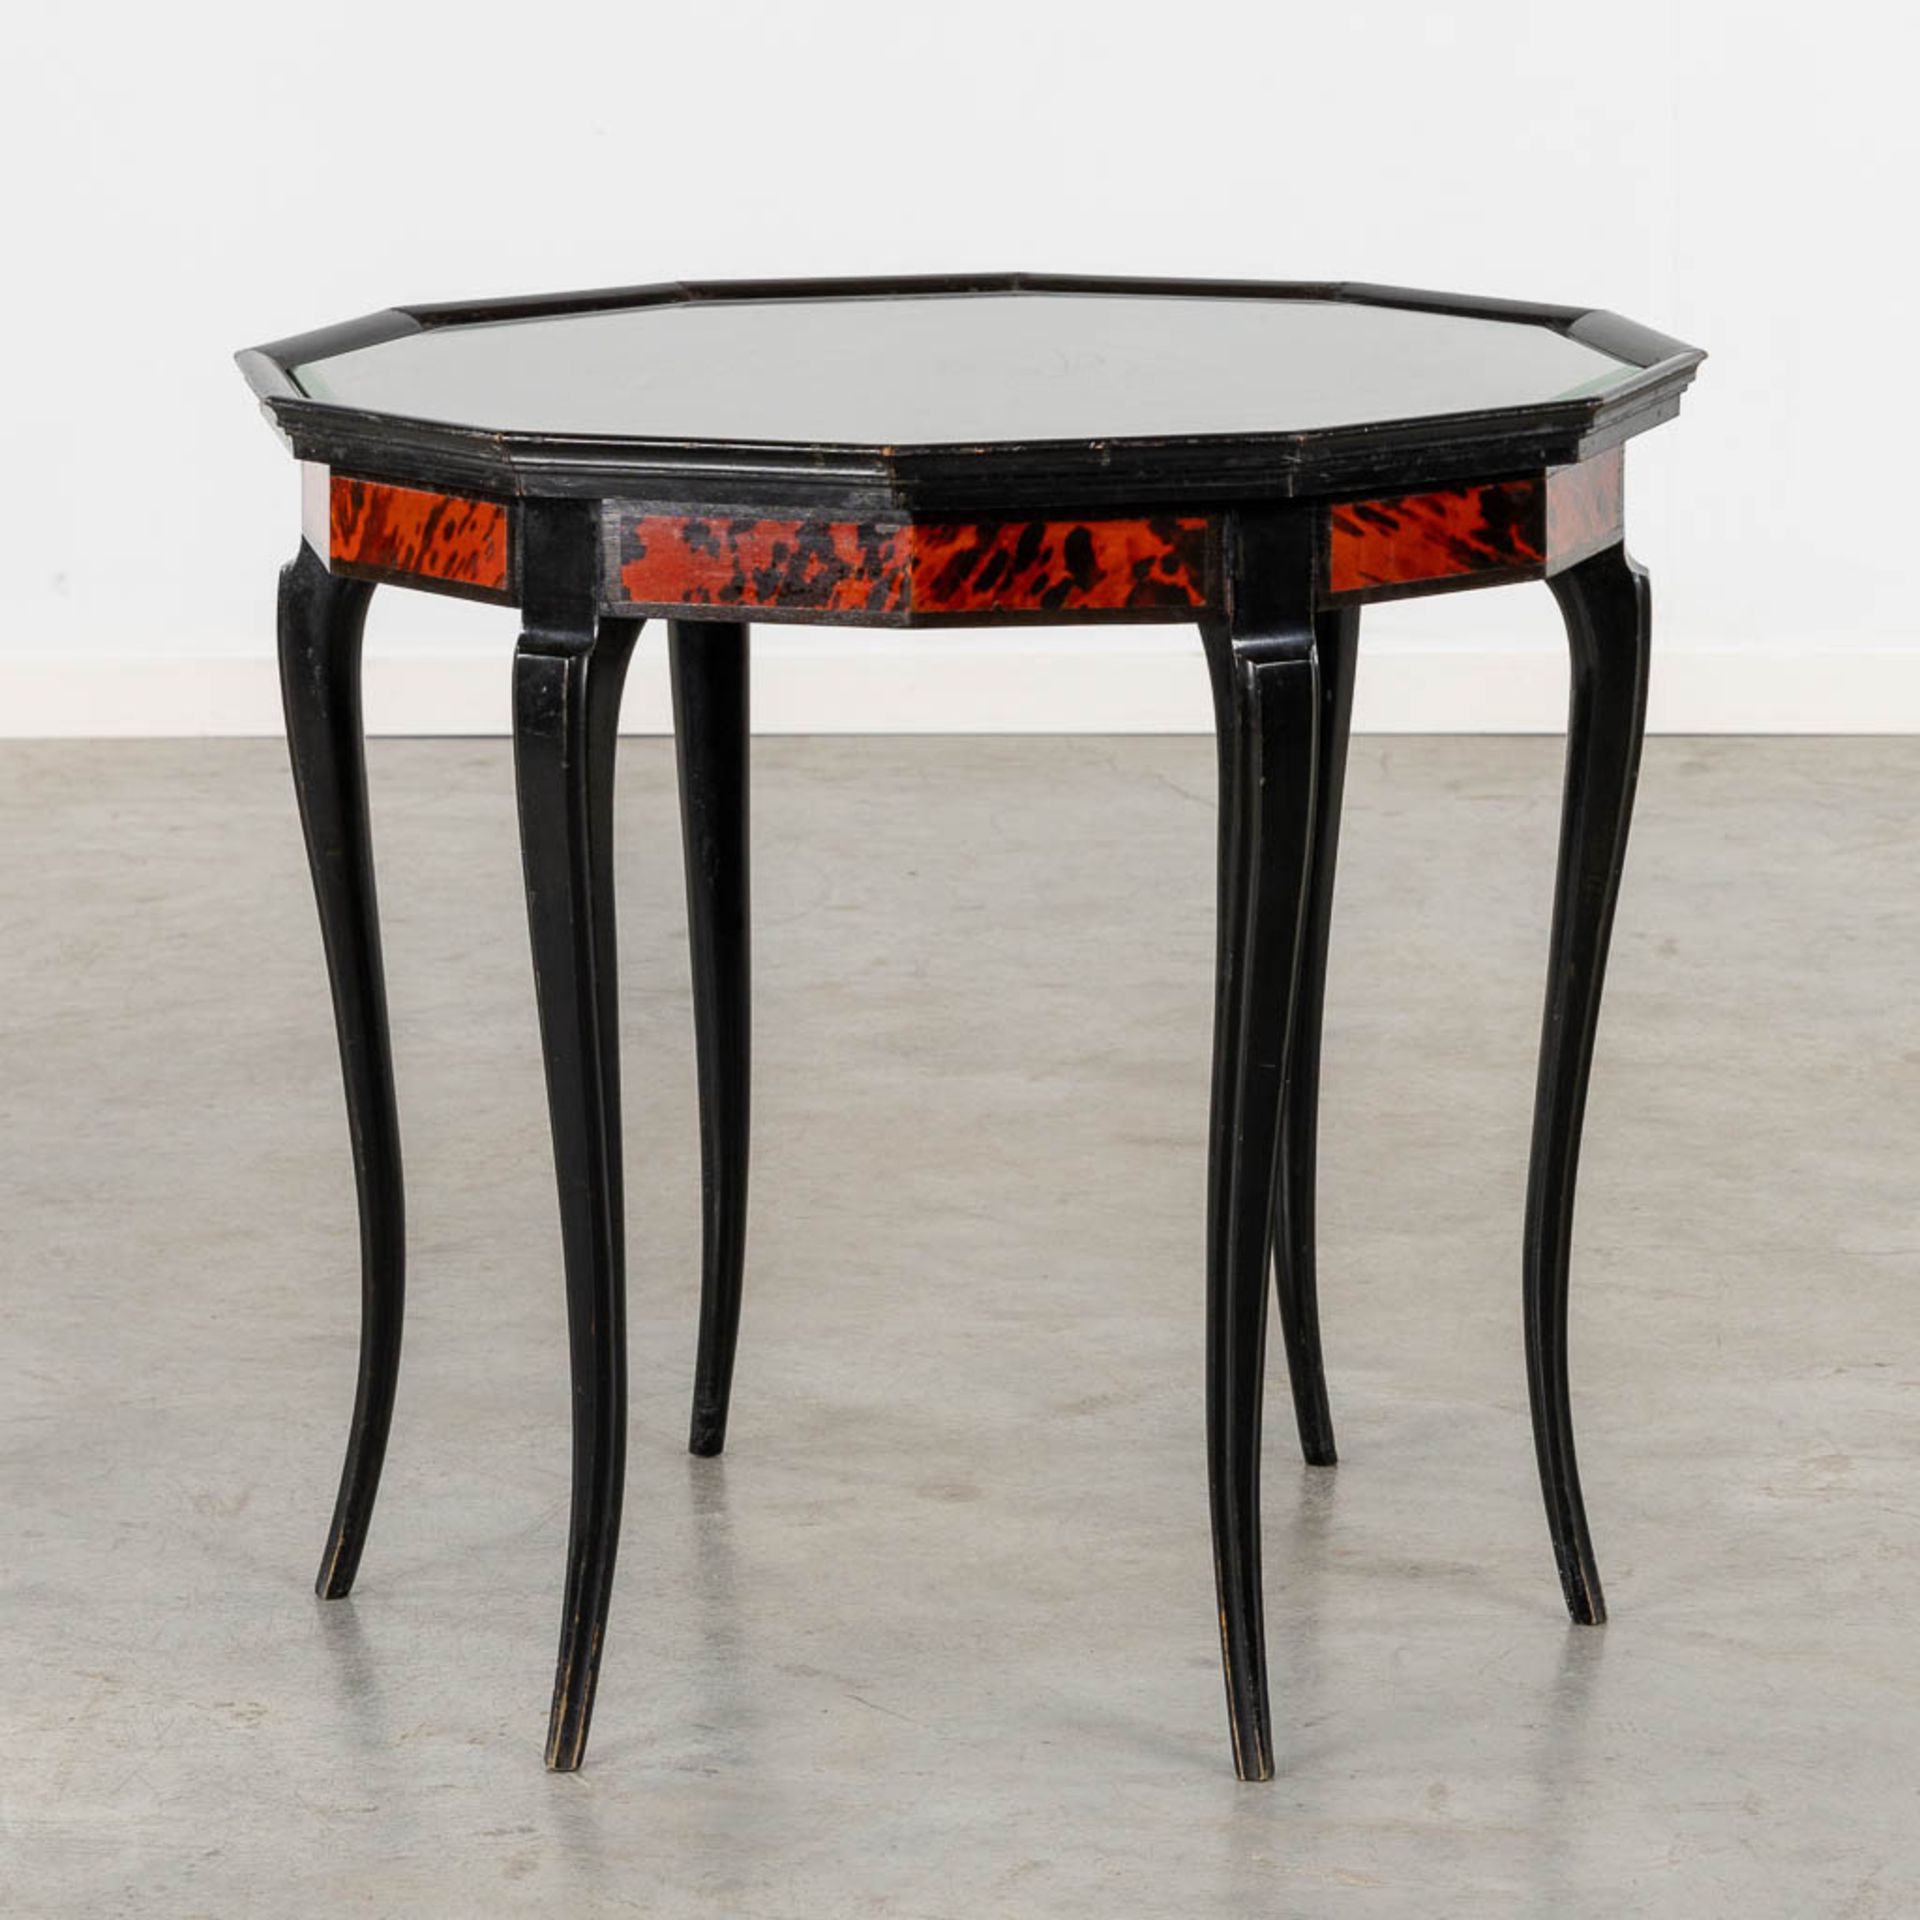 Maison Franck, Antwerp, an octagonal side table, tortoise shell and ebonised wood. (H:65 x D:72 cm) - Image 5 of 8